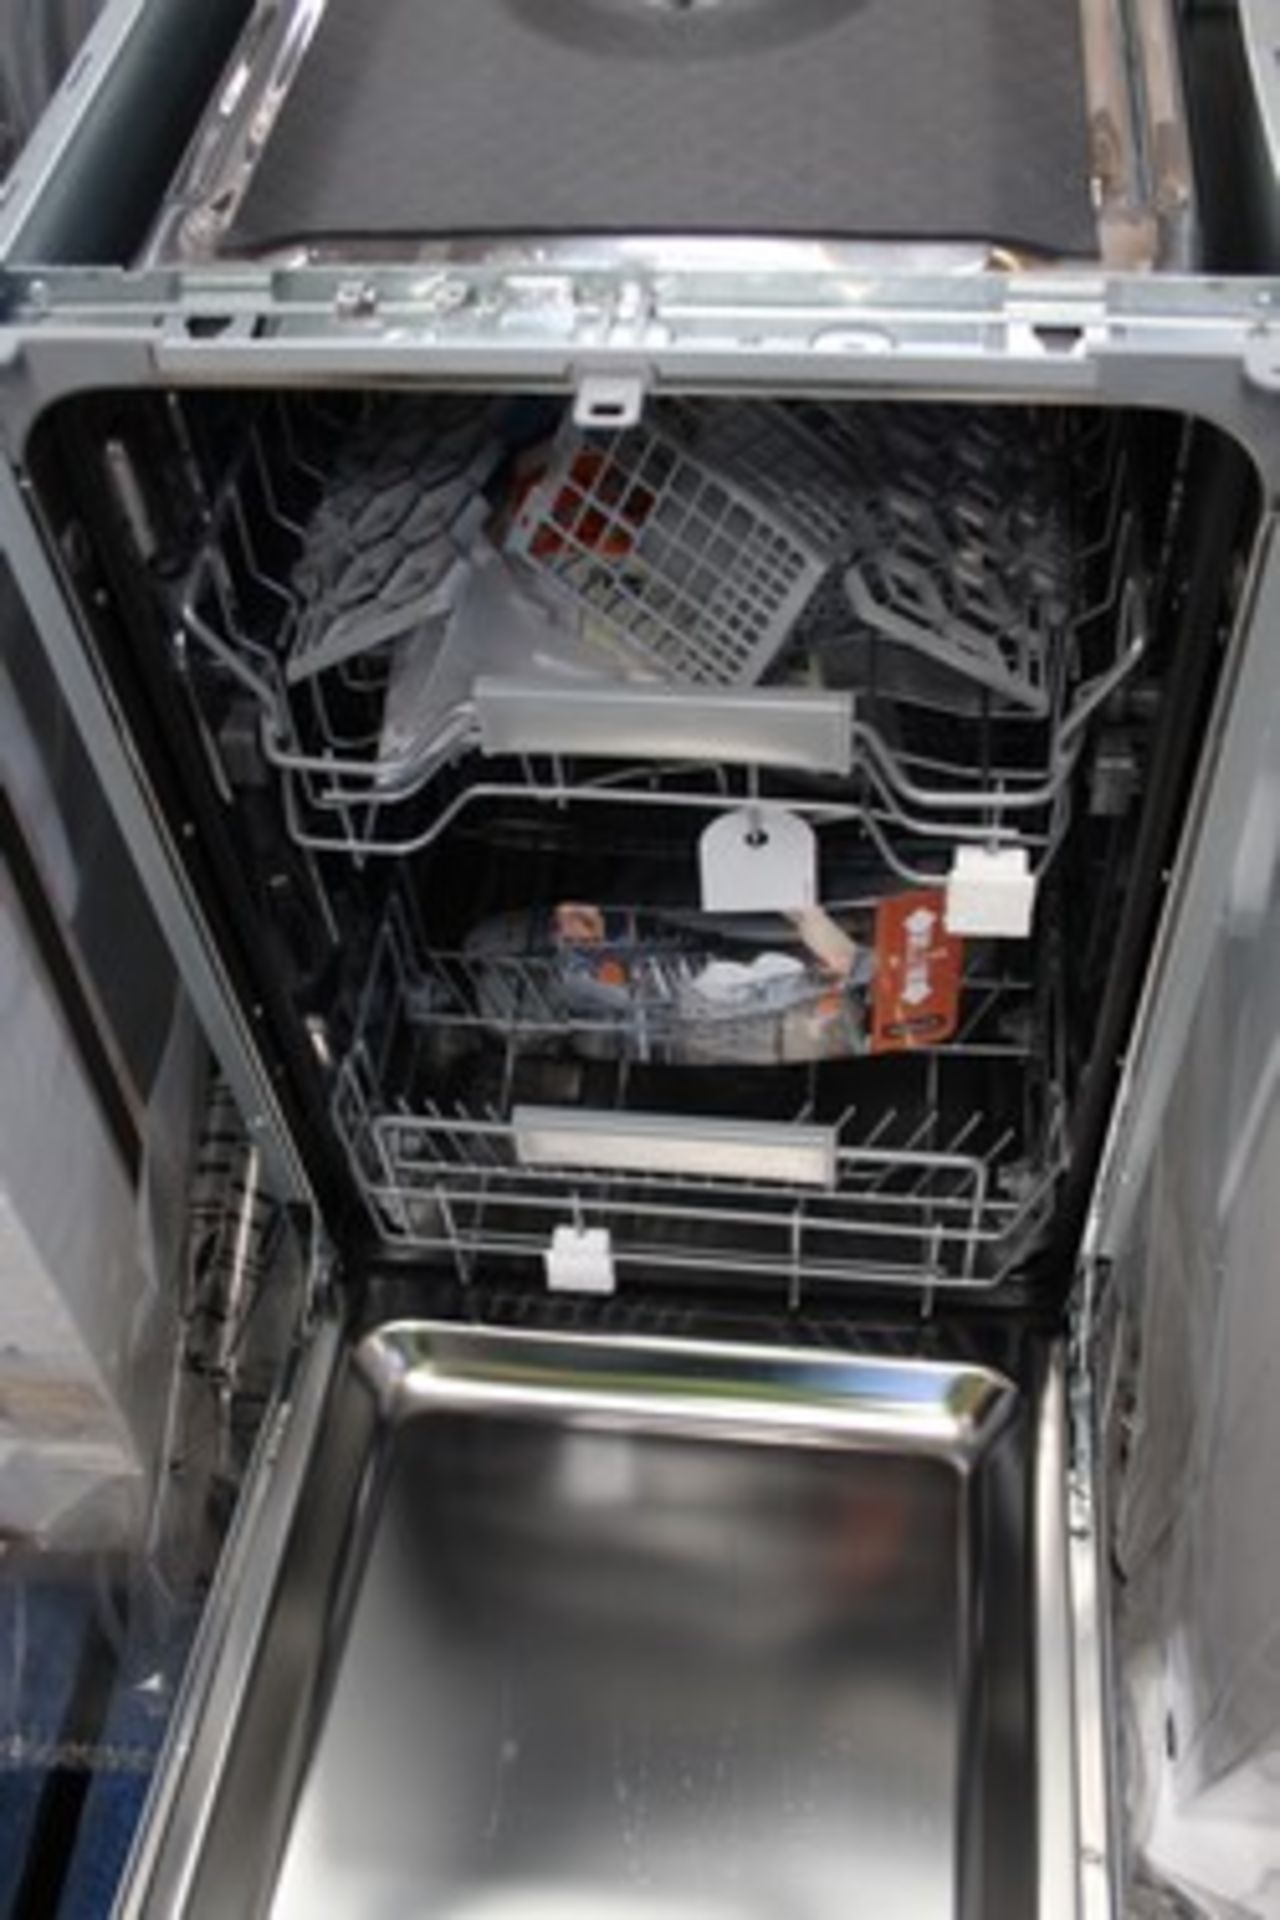 1 x Hotpoint built in fully integrated slimline dishwasher, Model H51C1H4798B1UK, single dent to - Image 3 of 3